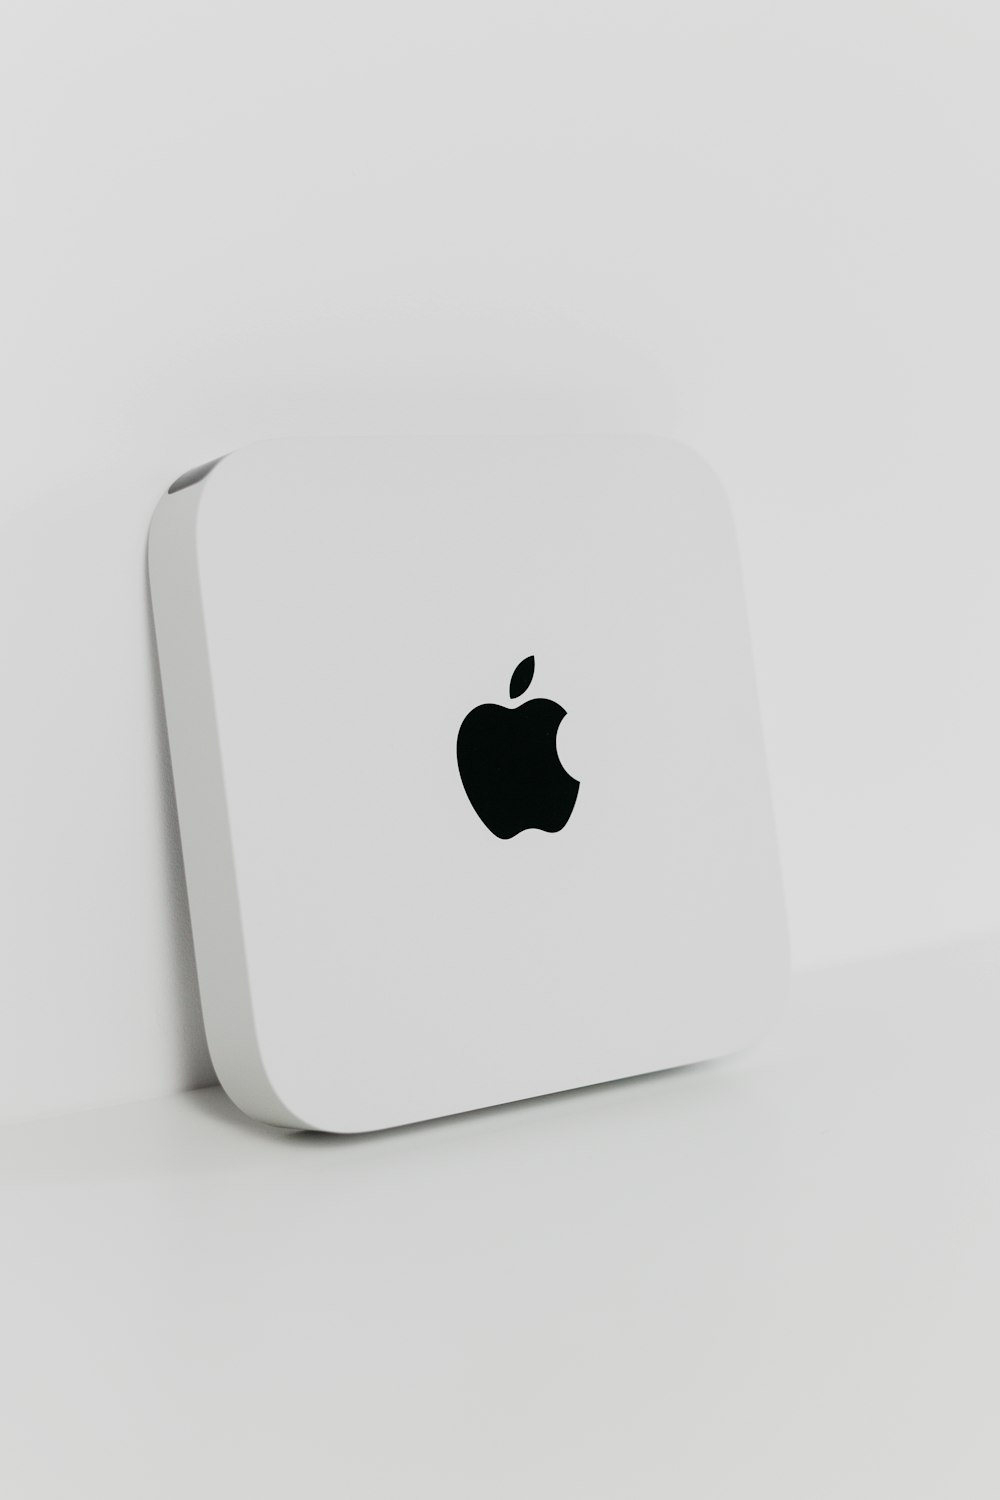 a close up of an apple product on a white surface